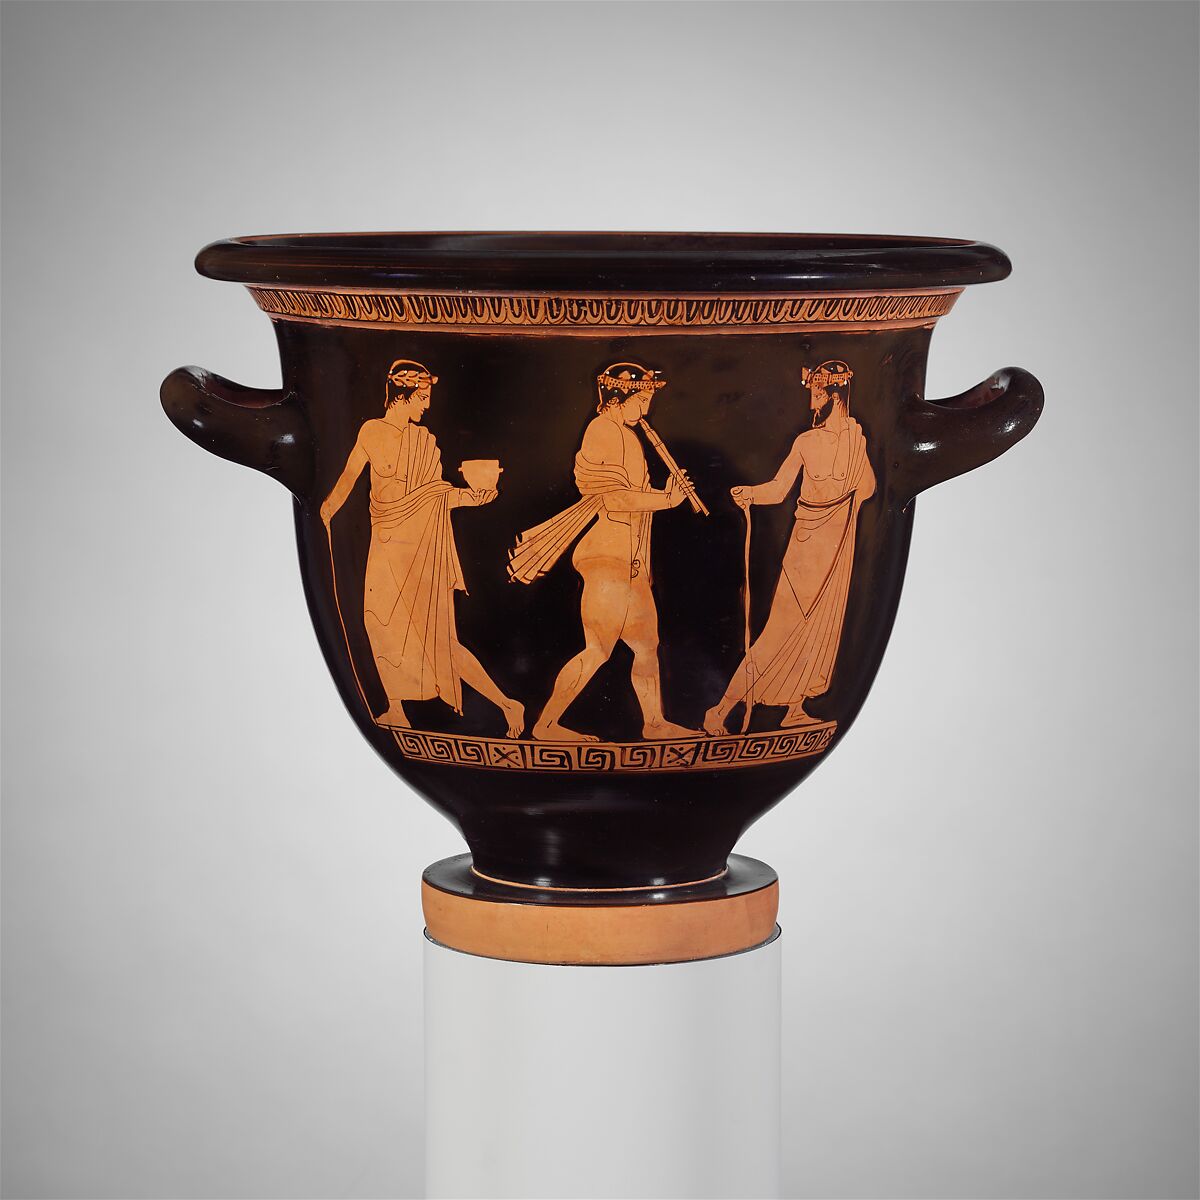 Terracotta bell-krater (bowl for mixing wine and water), Attributed to the Menelaos Painter, Terracotta, Greek, Attic 